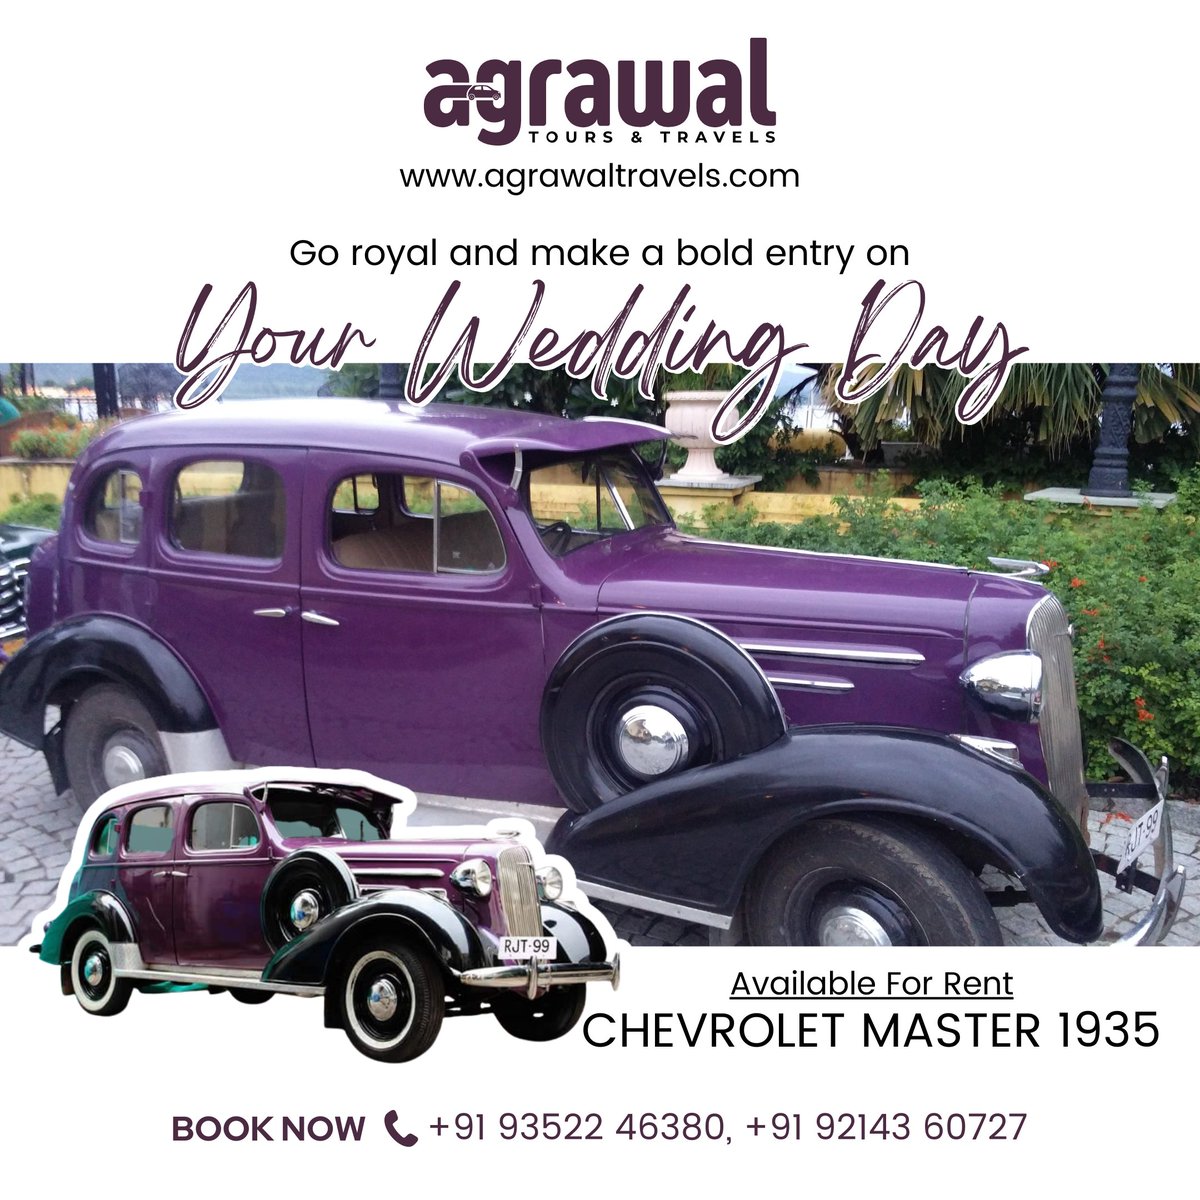 Go royal and make a bold entry on YOUR WEDDING DAY😉

#vintage #vintagecars #carsofinstagram #weddingentry #weddingentryideas #weddingentries #royalwedding #royalweddings #royalweddingcollection